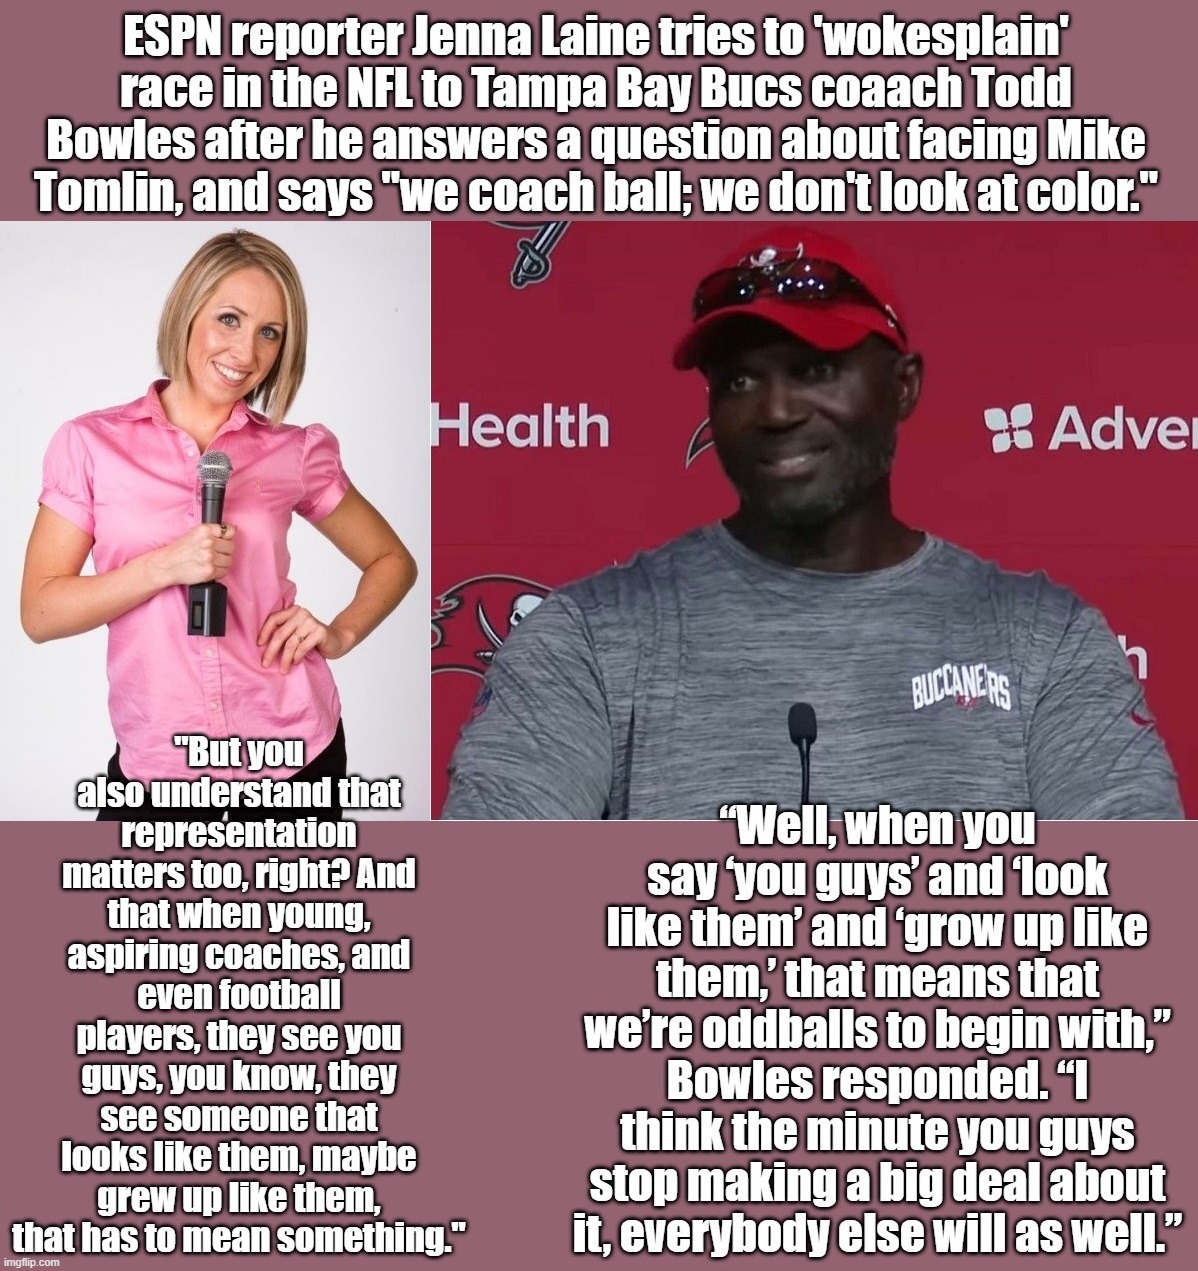 If Coach Bowles tries to judge people on their ability, not their skin color, woke liberals may cancel him & label him a racist. | image tagged in liberals,liberal logic,liberal hypocrisy,liberal media,liberal racists,liberals suck | made w/ Imgflip meme maker